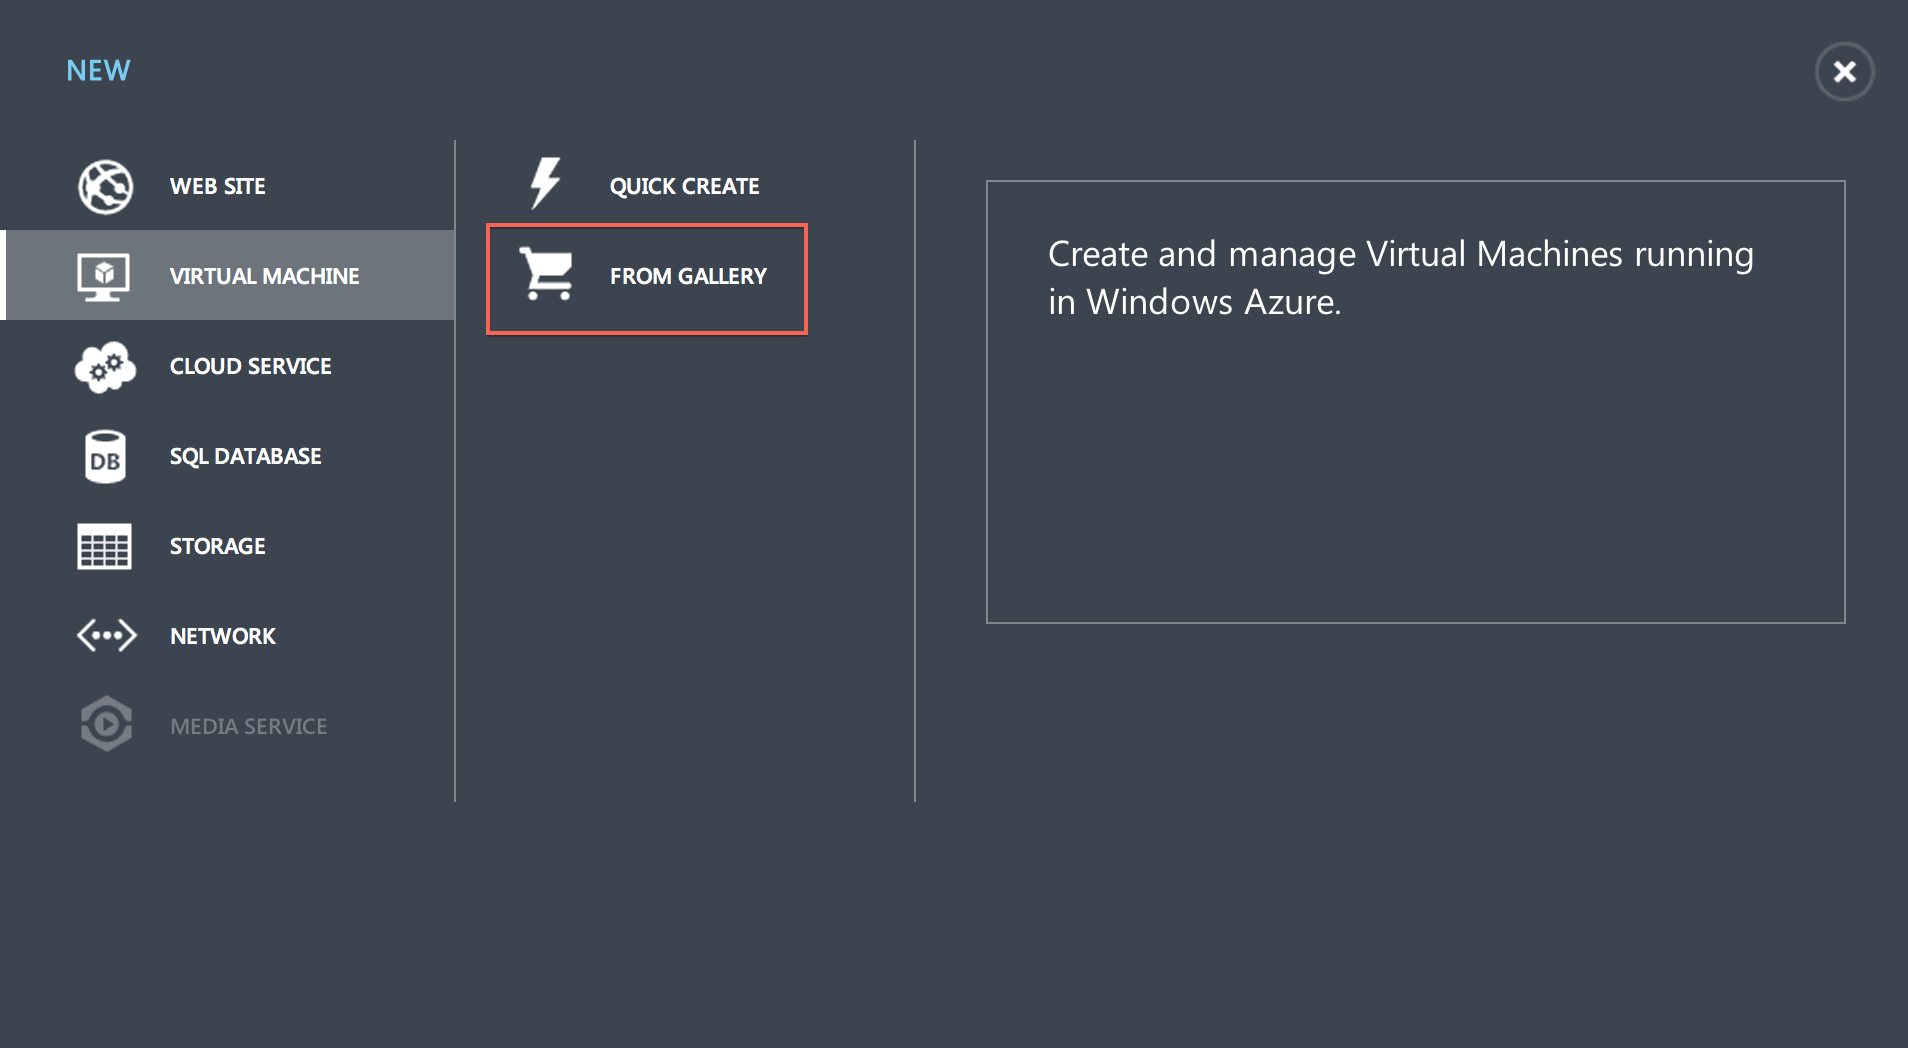 Step 2: Select "Virtual Machine", "From Gallery"